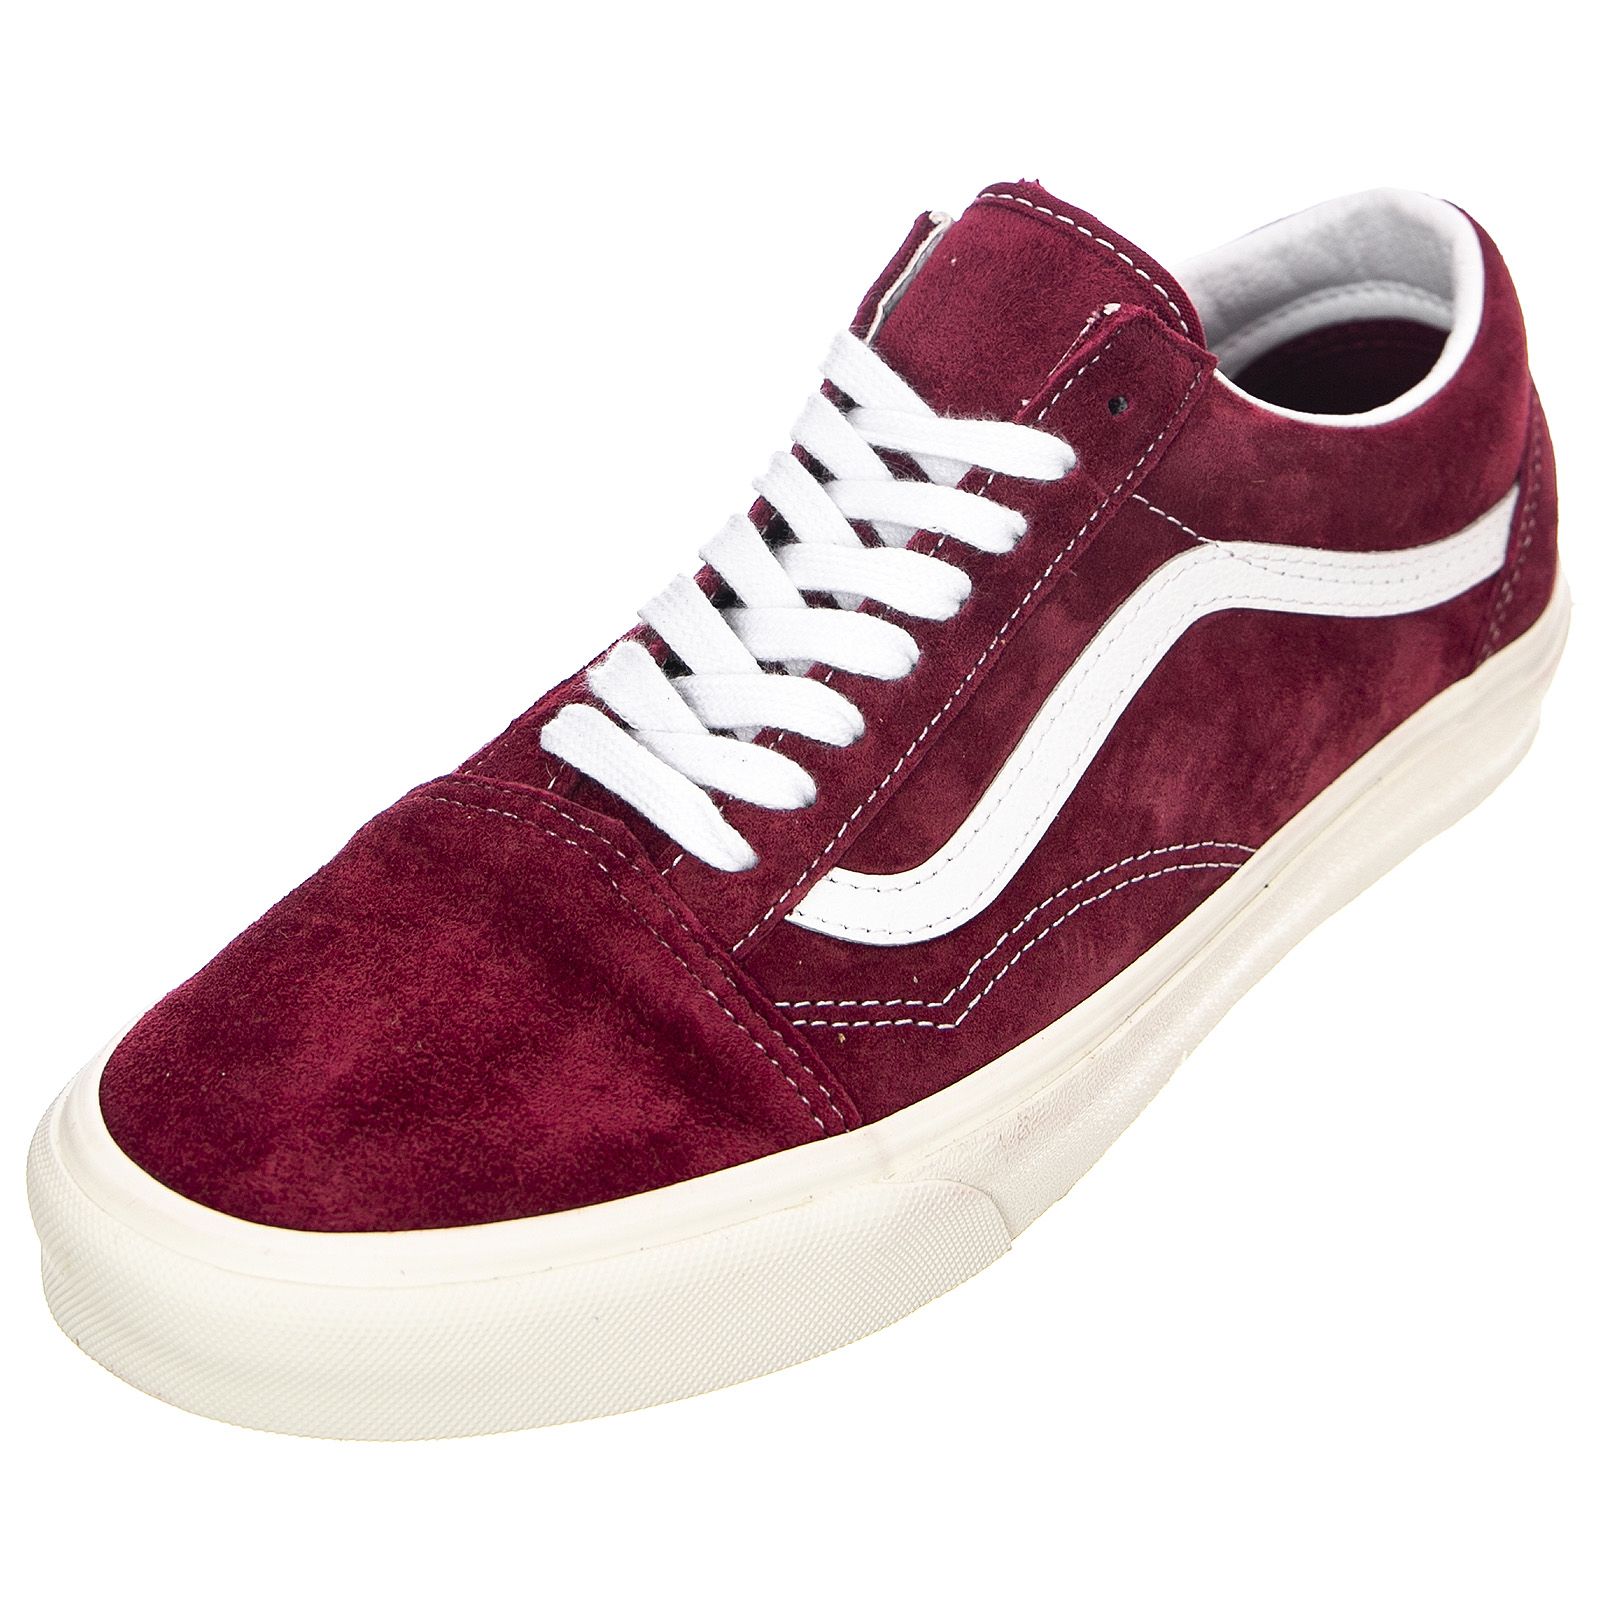 Lace-Up Pig | Old UA / Snow Suede Vans Skool Pomegranate Law-Profile White on Buy Sh